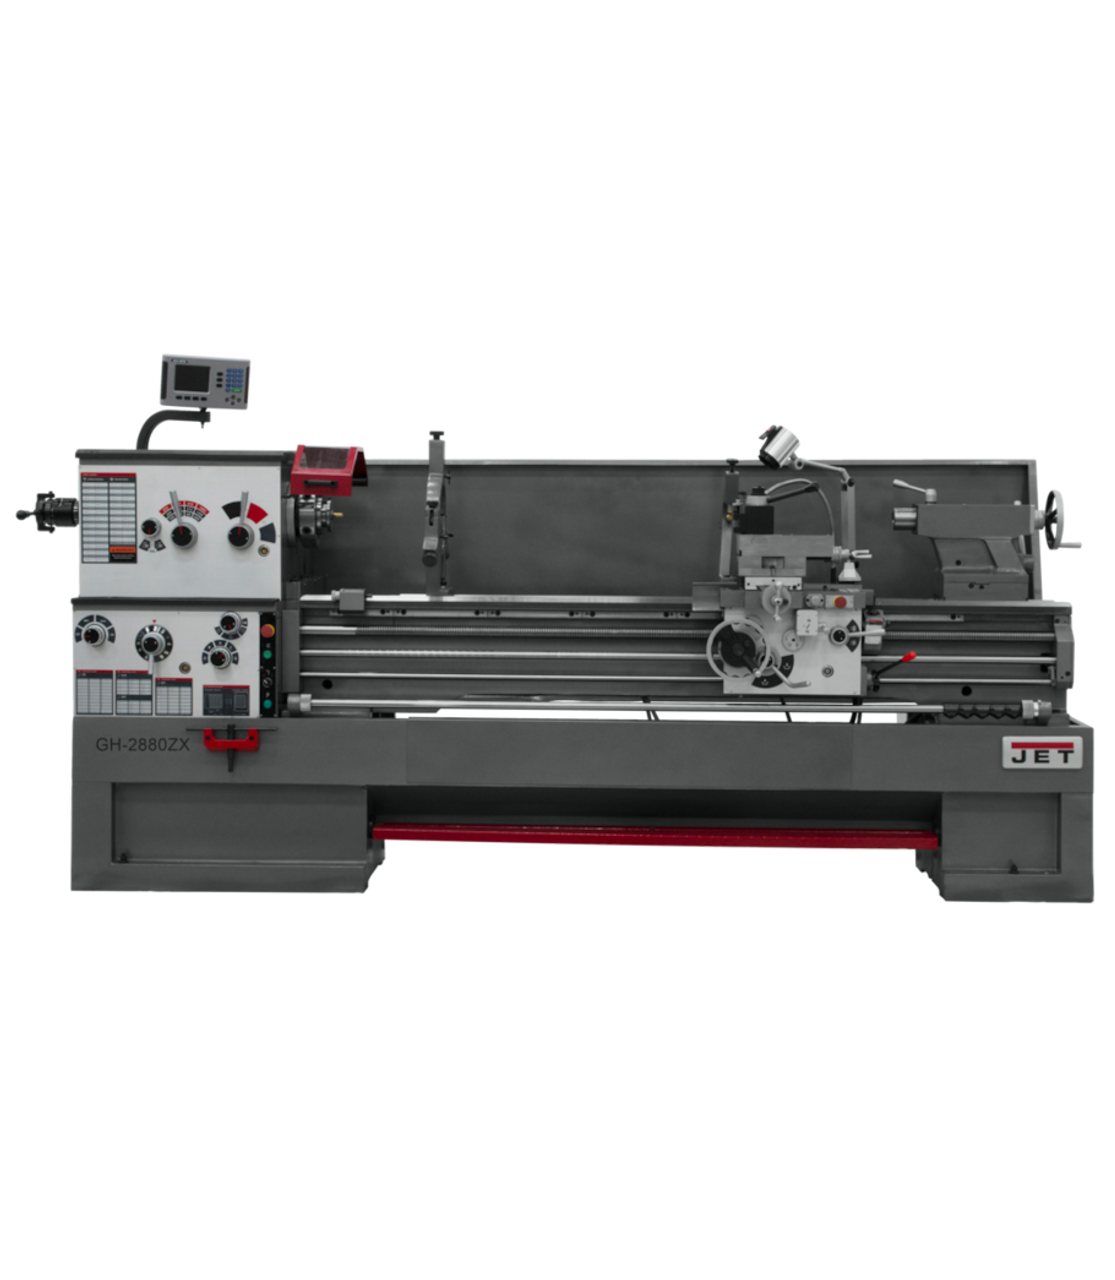 JET GH-2280ZX Large Spindle Bore Lathe with ACU-RITE 203 DRO with Taper Attachment 460V